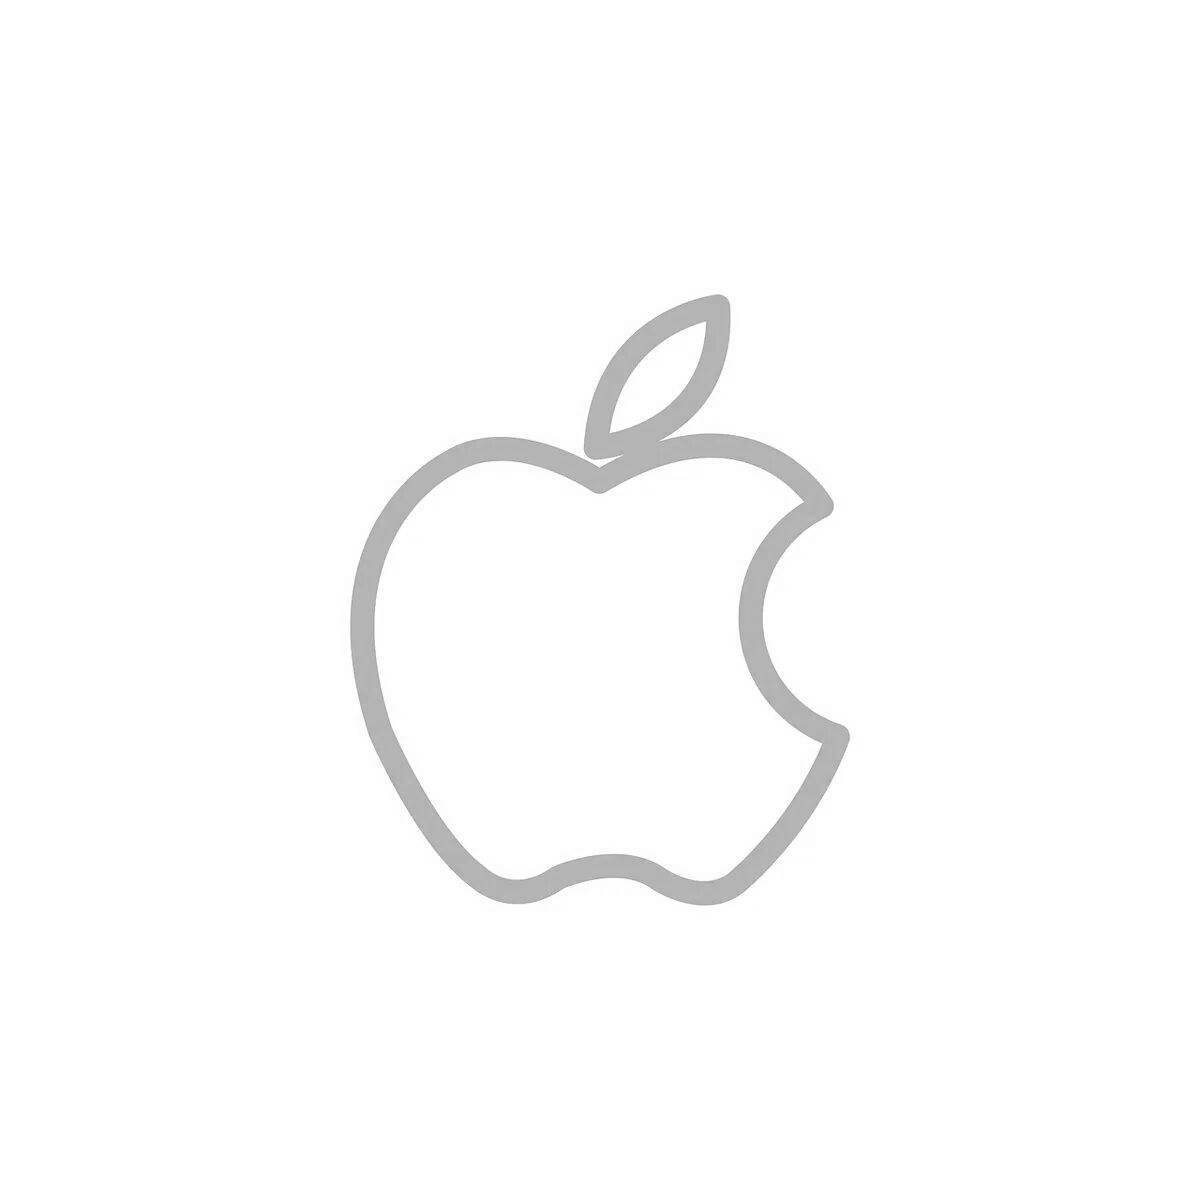 Impressive iphone apple coloring page